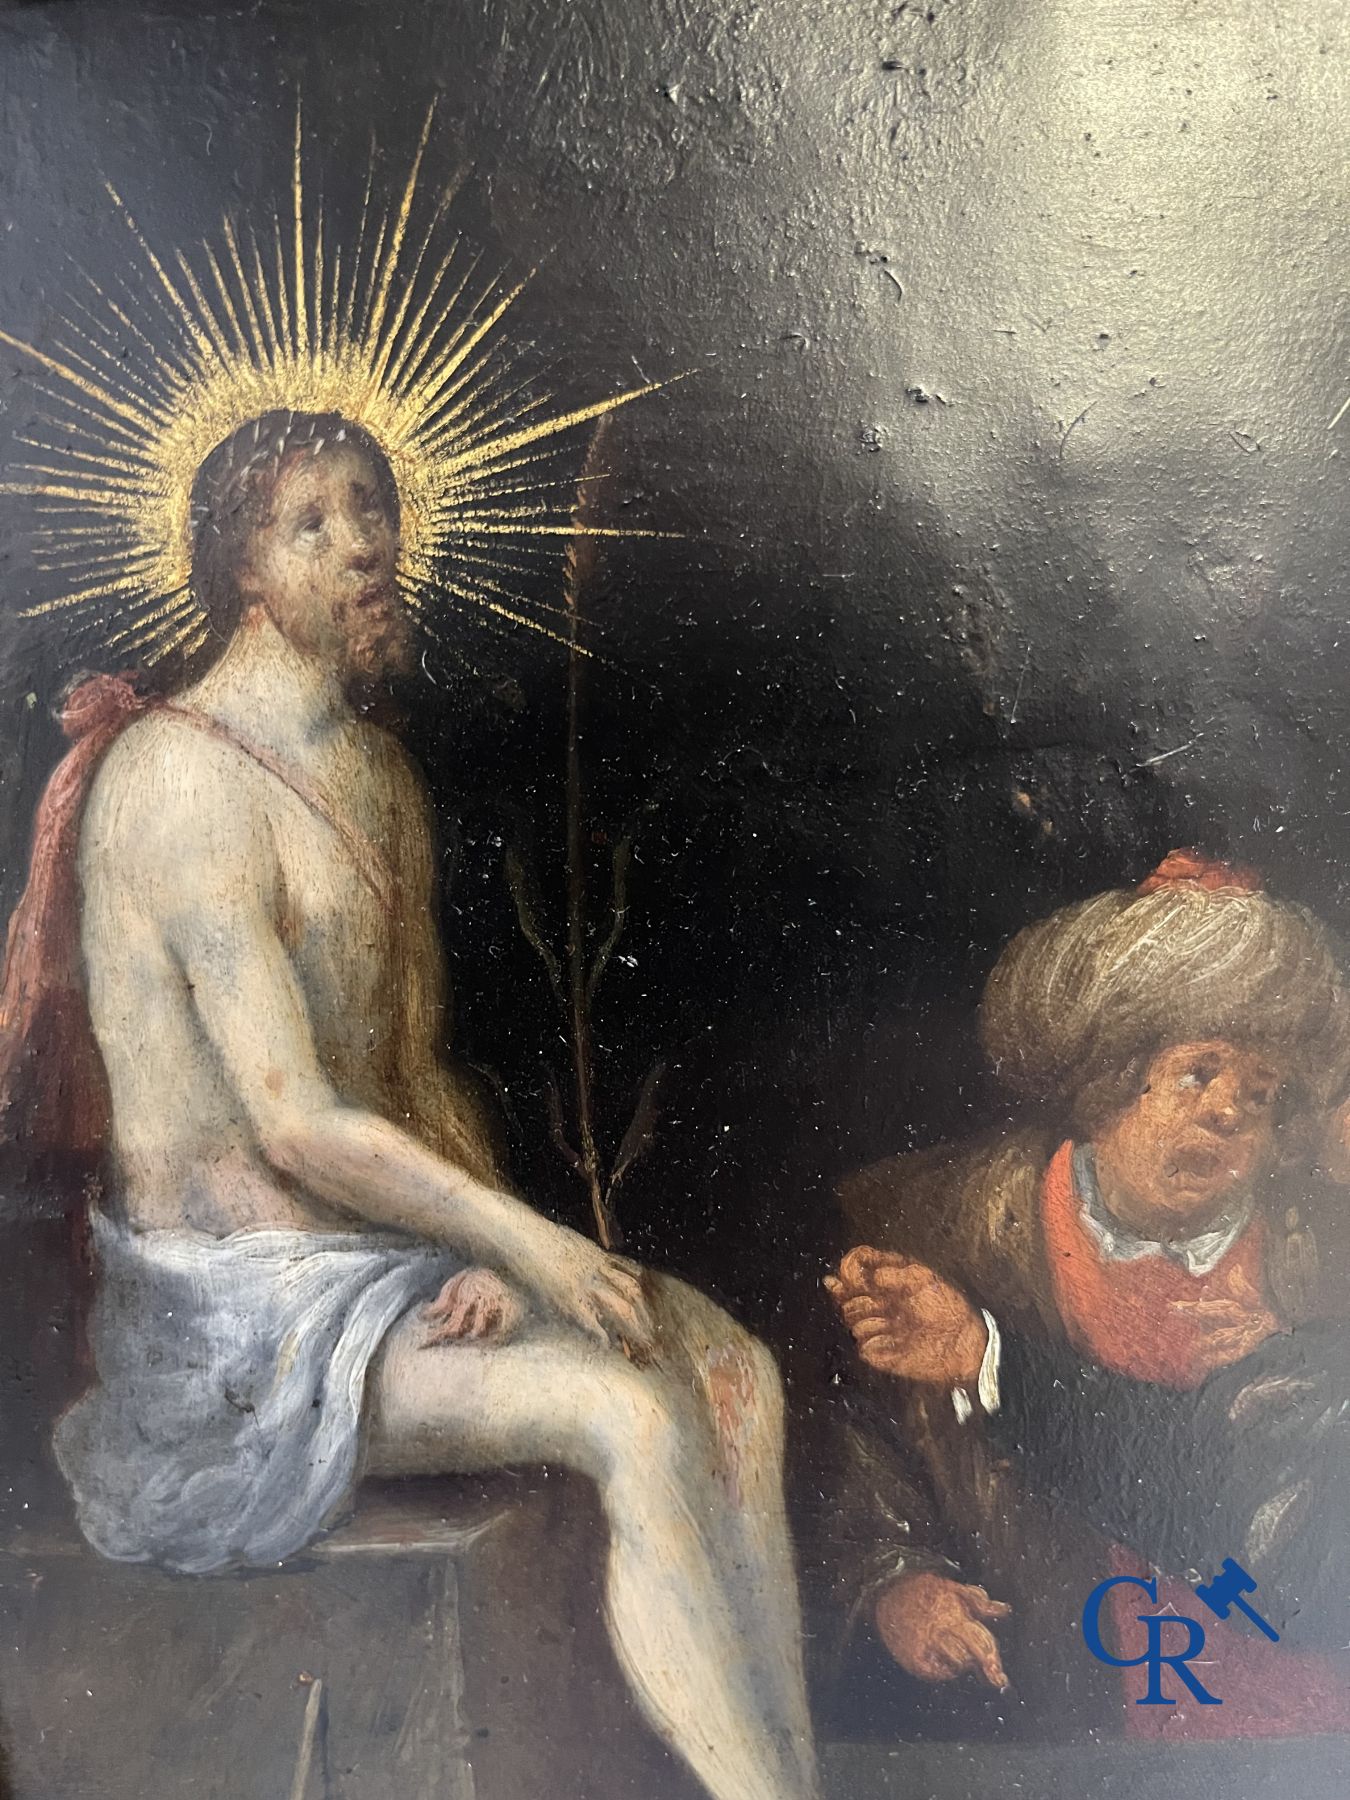 Painting: Antwerp, 16th century. The mockery of Christ. - Image 3 of 11